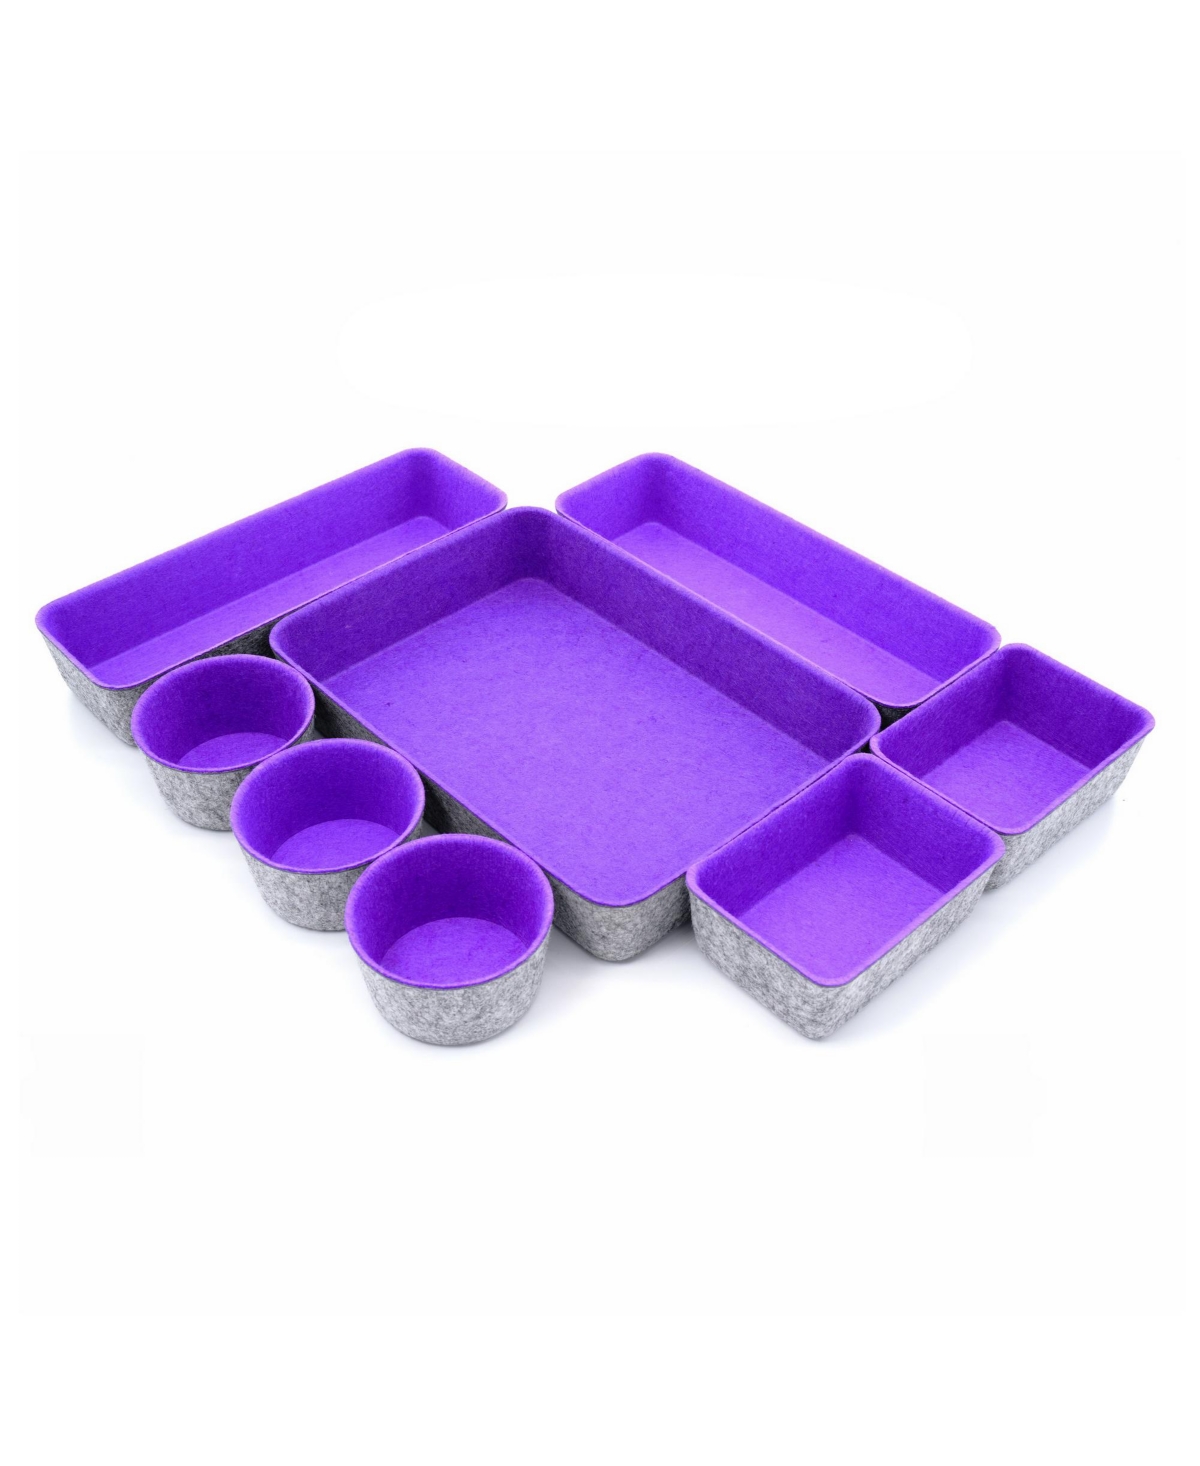 Shop Welaxy 8 Piece Felt Drawer Organizer Set With Round Cups And Trays In Purple